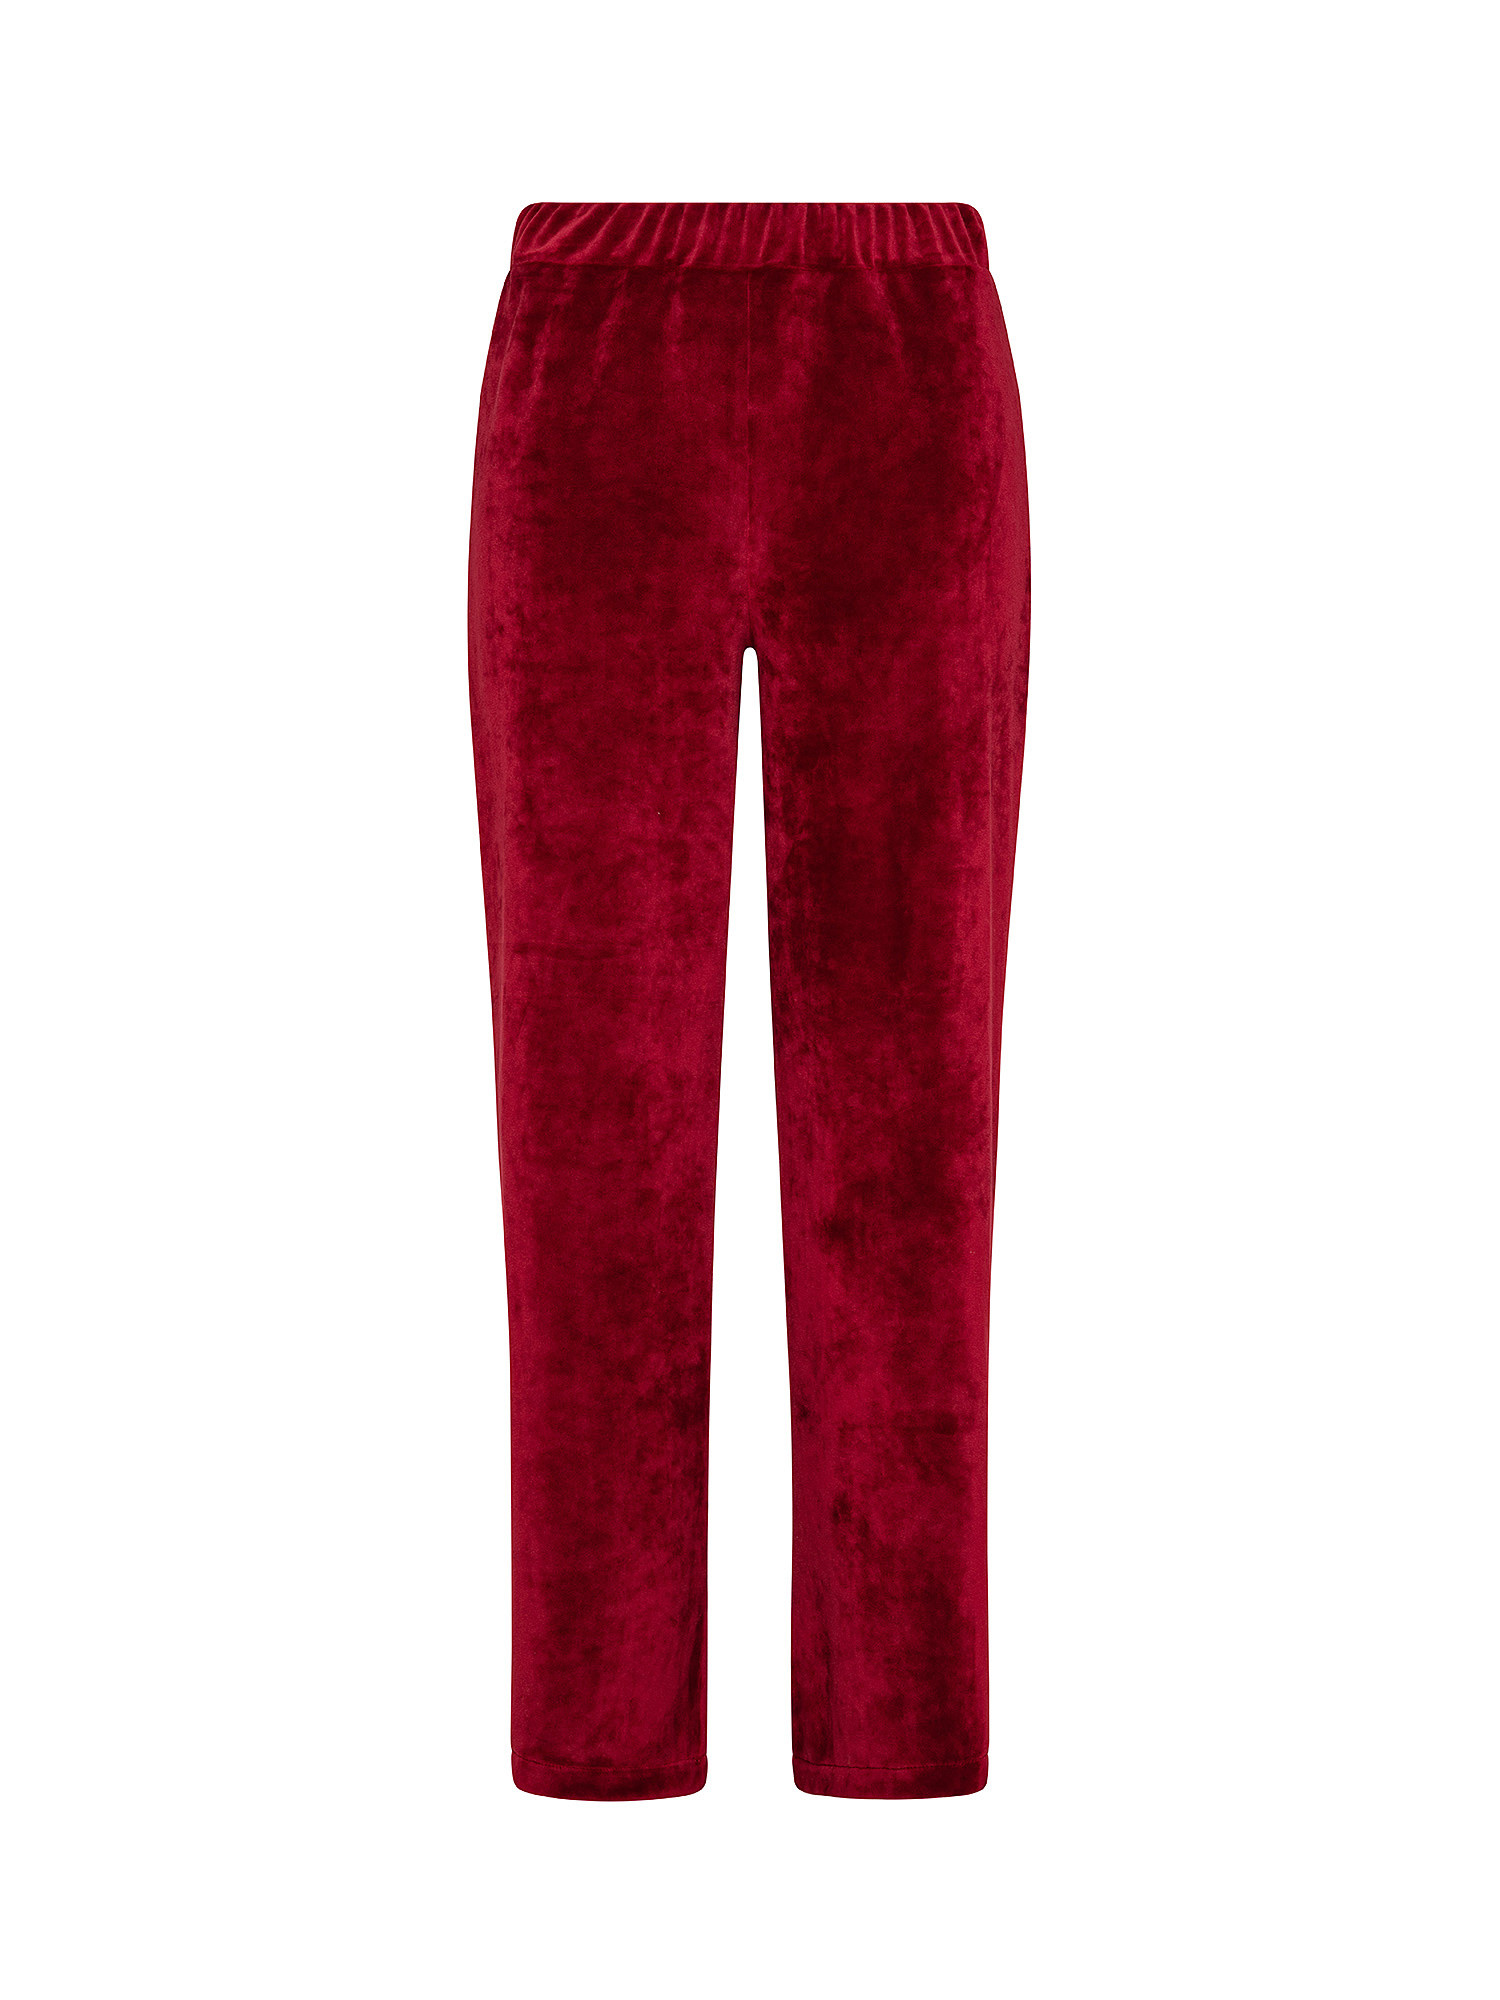 Pantalone in ciniglia, Rosso bordeaux, large image number 0